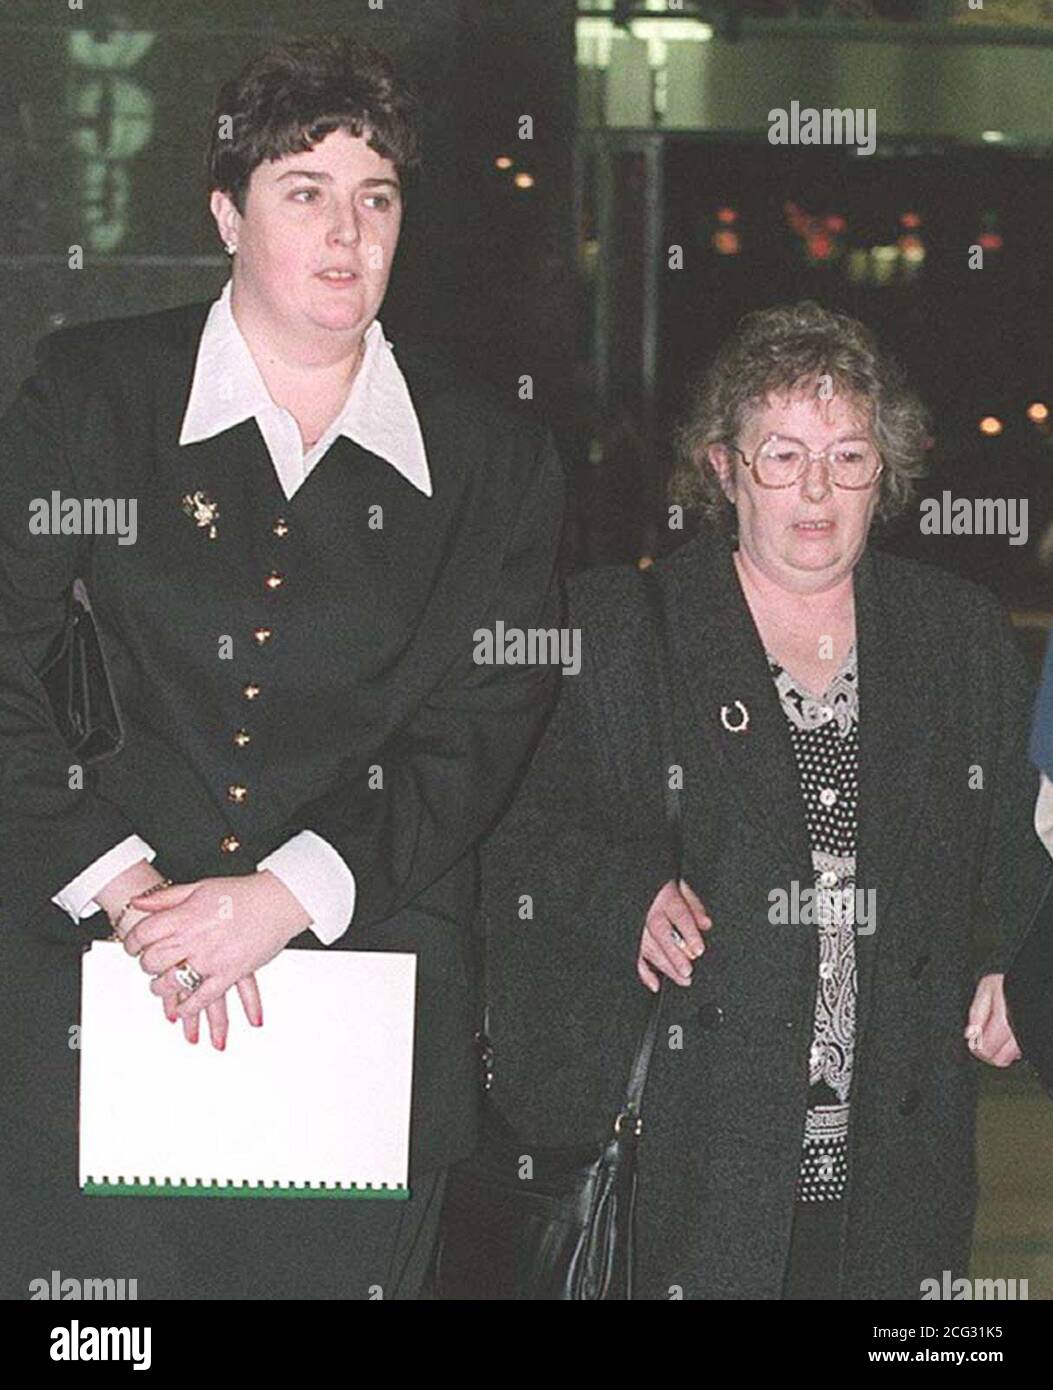 BHAM 2: BIRMINGHAM: 17.01.95: Pat Dunn leaves Birmingham County Court  today (Tuesday) with  her daughter Debbie Doyle,  where she is locked in a fierce legal battle with the mistress of her late  husband Ken Dunn,  over the right to be buried with him.  Mr Dunn died of a heart attack in 1991 in the arms  of his mistress Jean Cooper, for 16 years before his death both women shared his companionship, fully  aware of each others existence. WATCH FOR PA STORY. PA NEWS, David Jones. Stock Photo